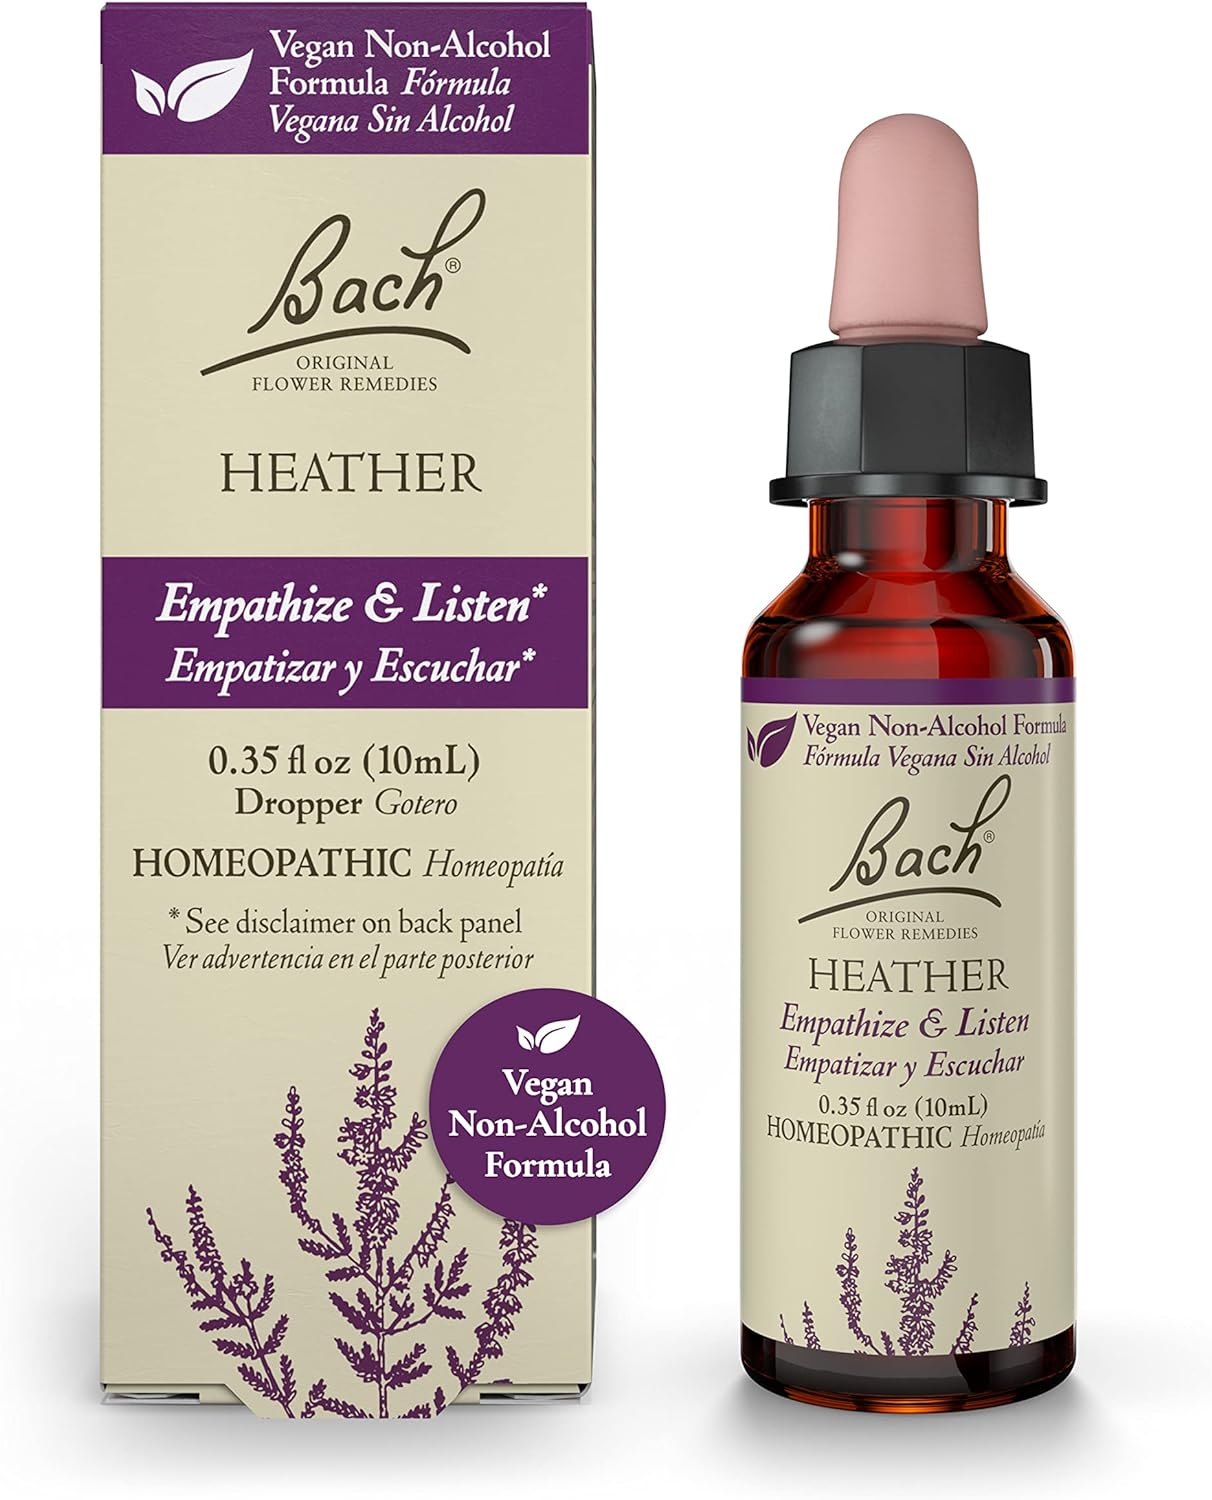 Bach Original Flower Remedies, Heather for Empathy (Non-Alcohol Formula), Natural Homeopathic Flower Essence, Holistic Wellness and Stress Relief, Vegan, 10mL Dropper